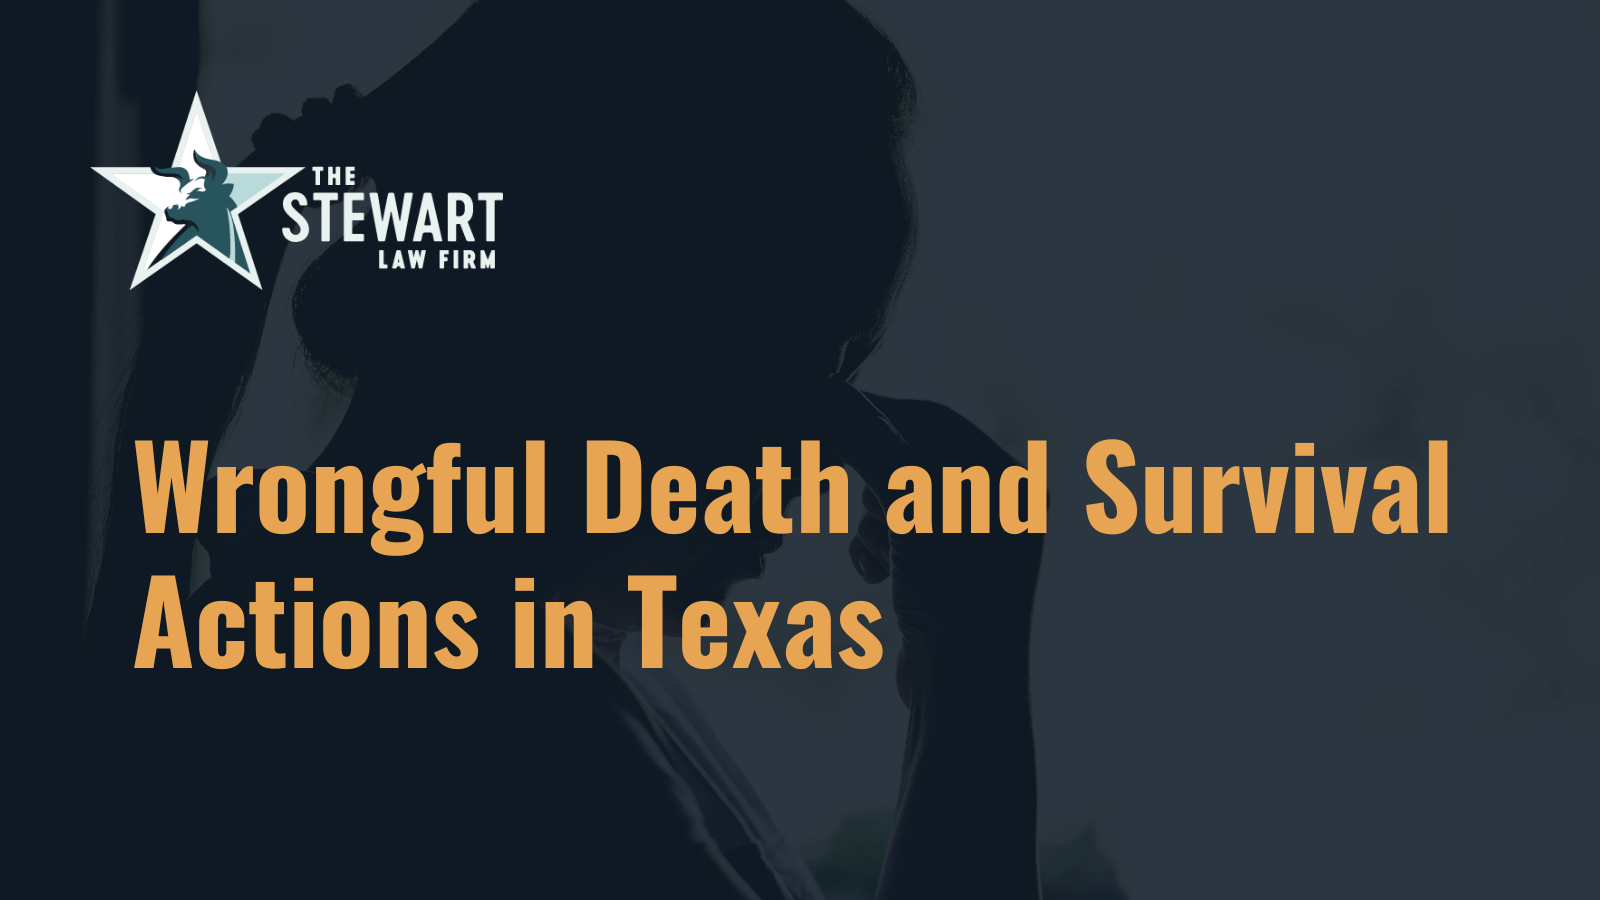 Wrongful Death and Survival Actions in Texas - the stephen stewart law firm - austin texas personal injury lawyer